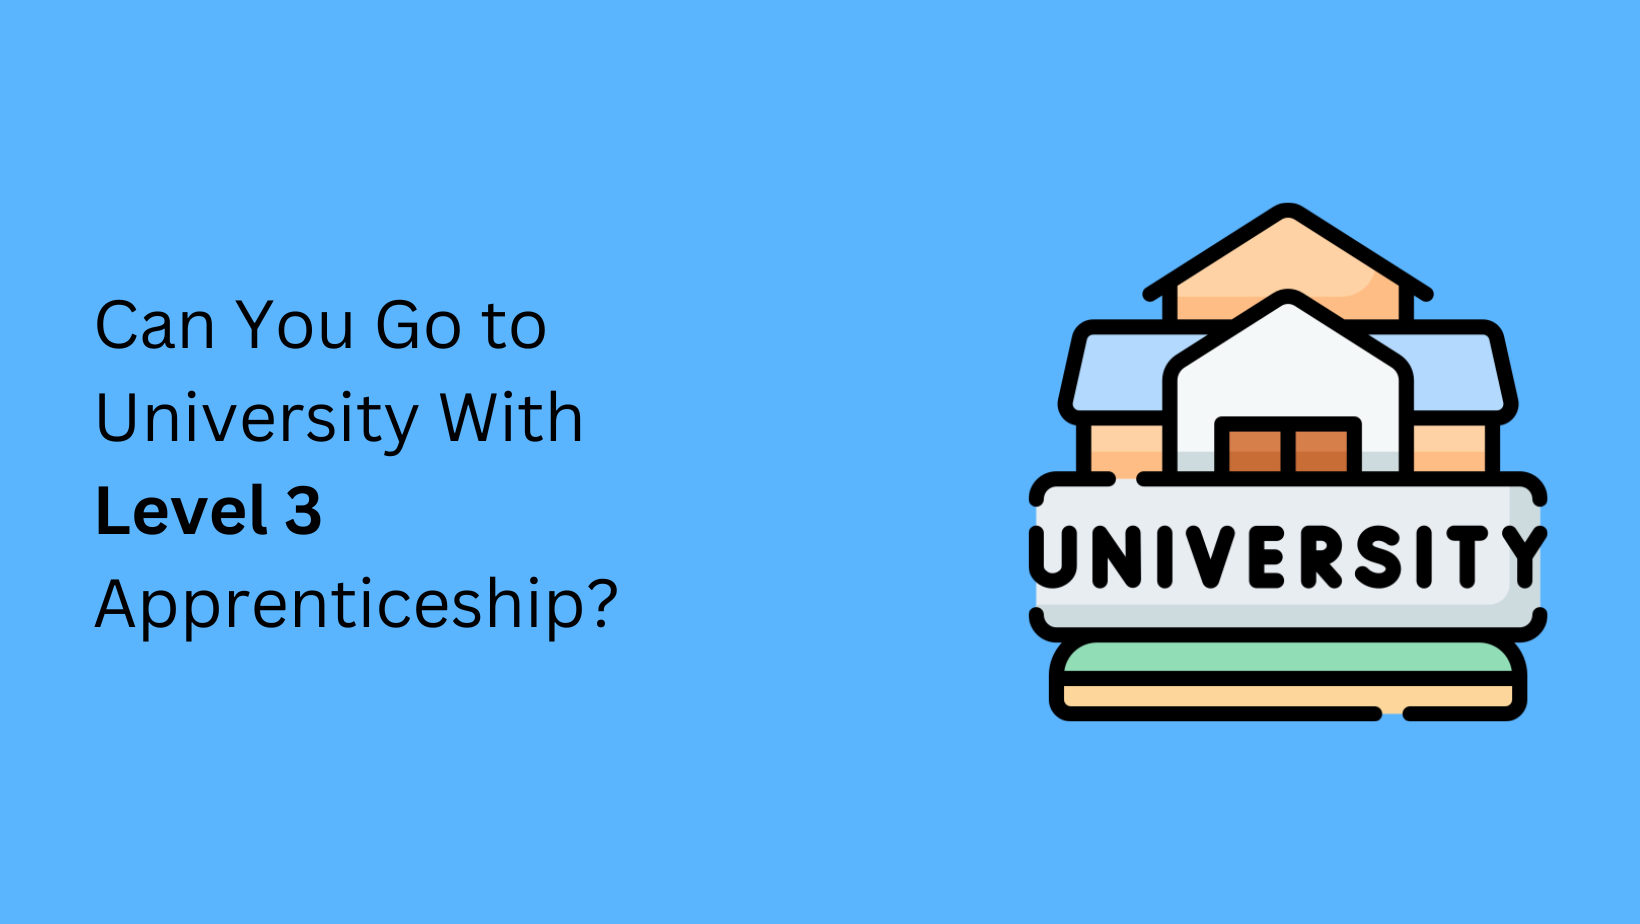 Can You Go to University with Level 3 Apprenticeship